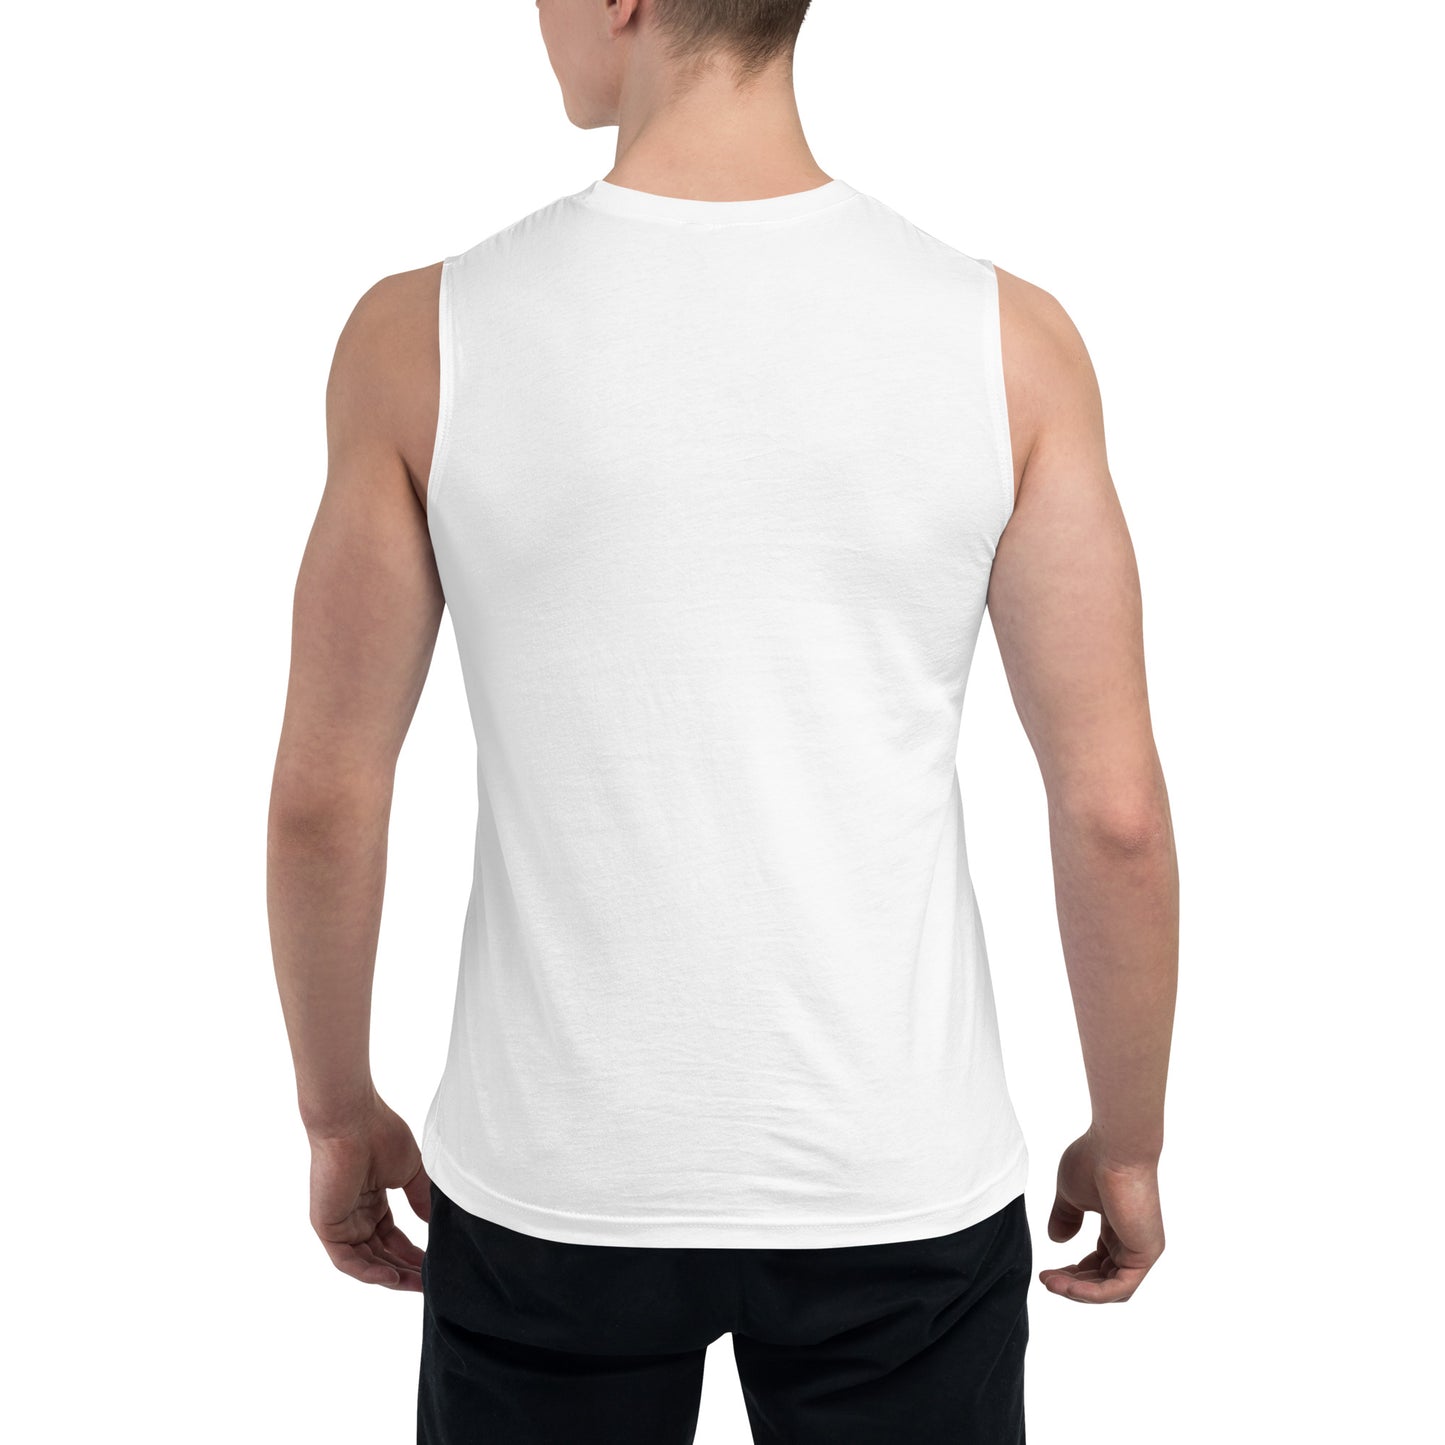 INFLUENCER Muscle Shirt (White)